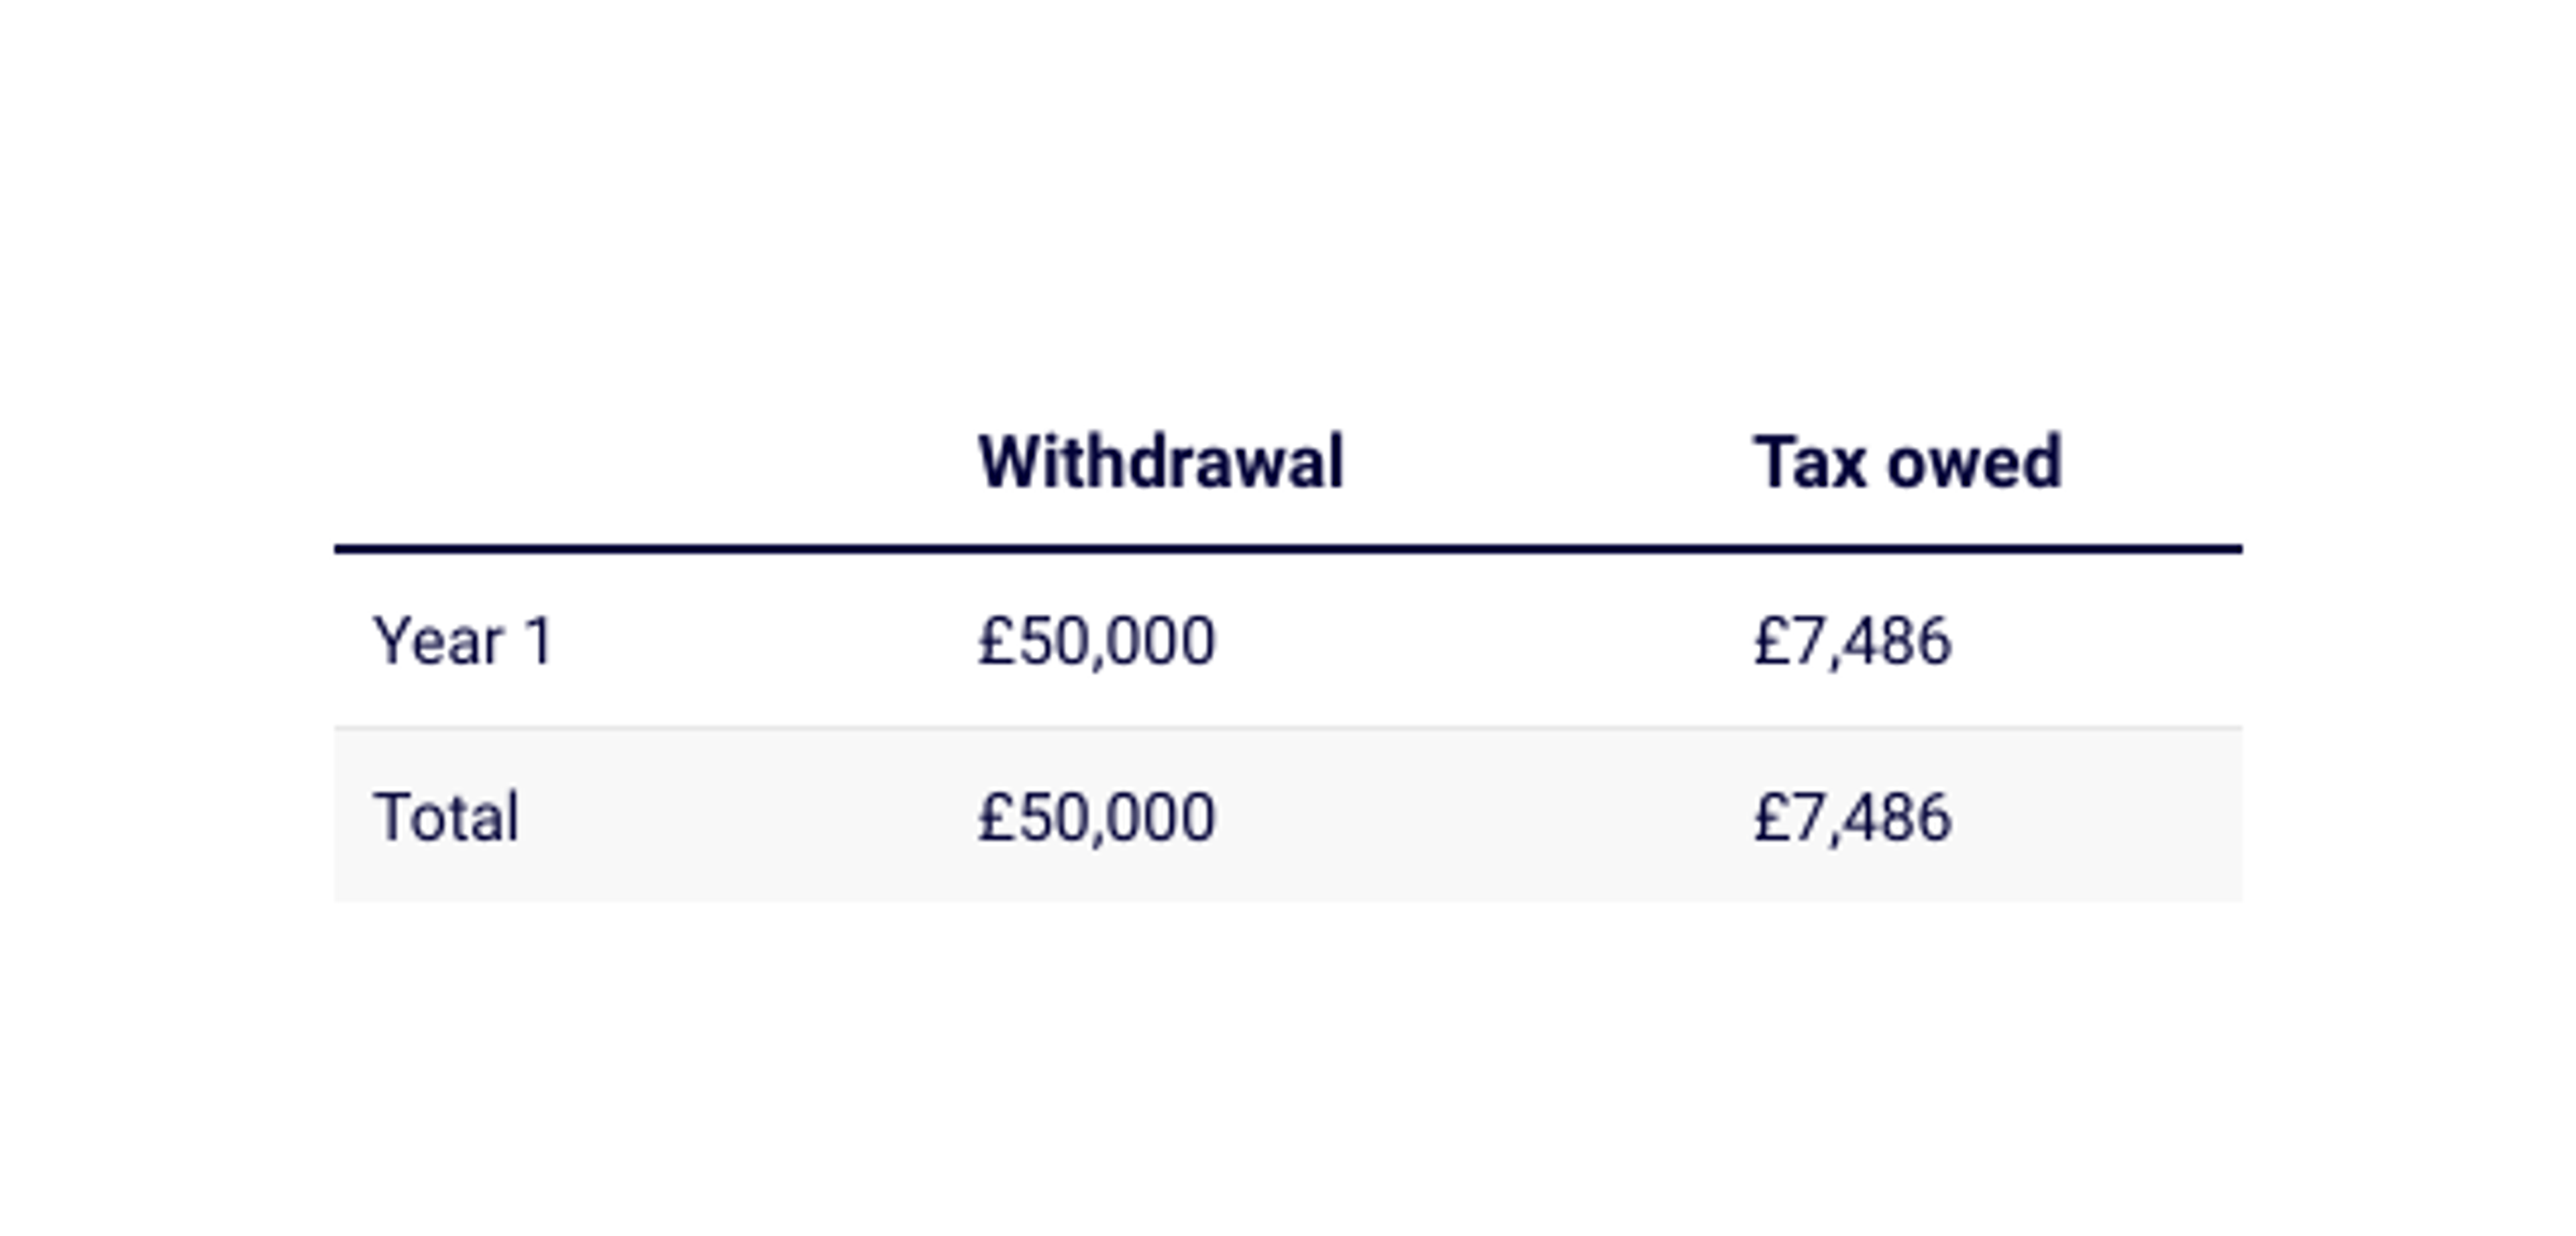 Table showing pension withdrawal tax owed